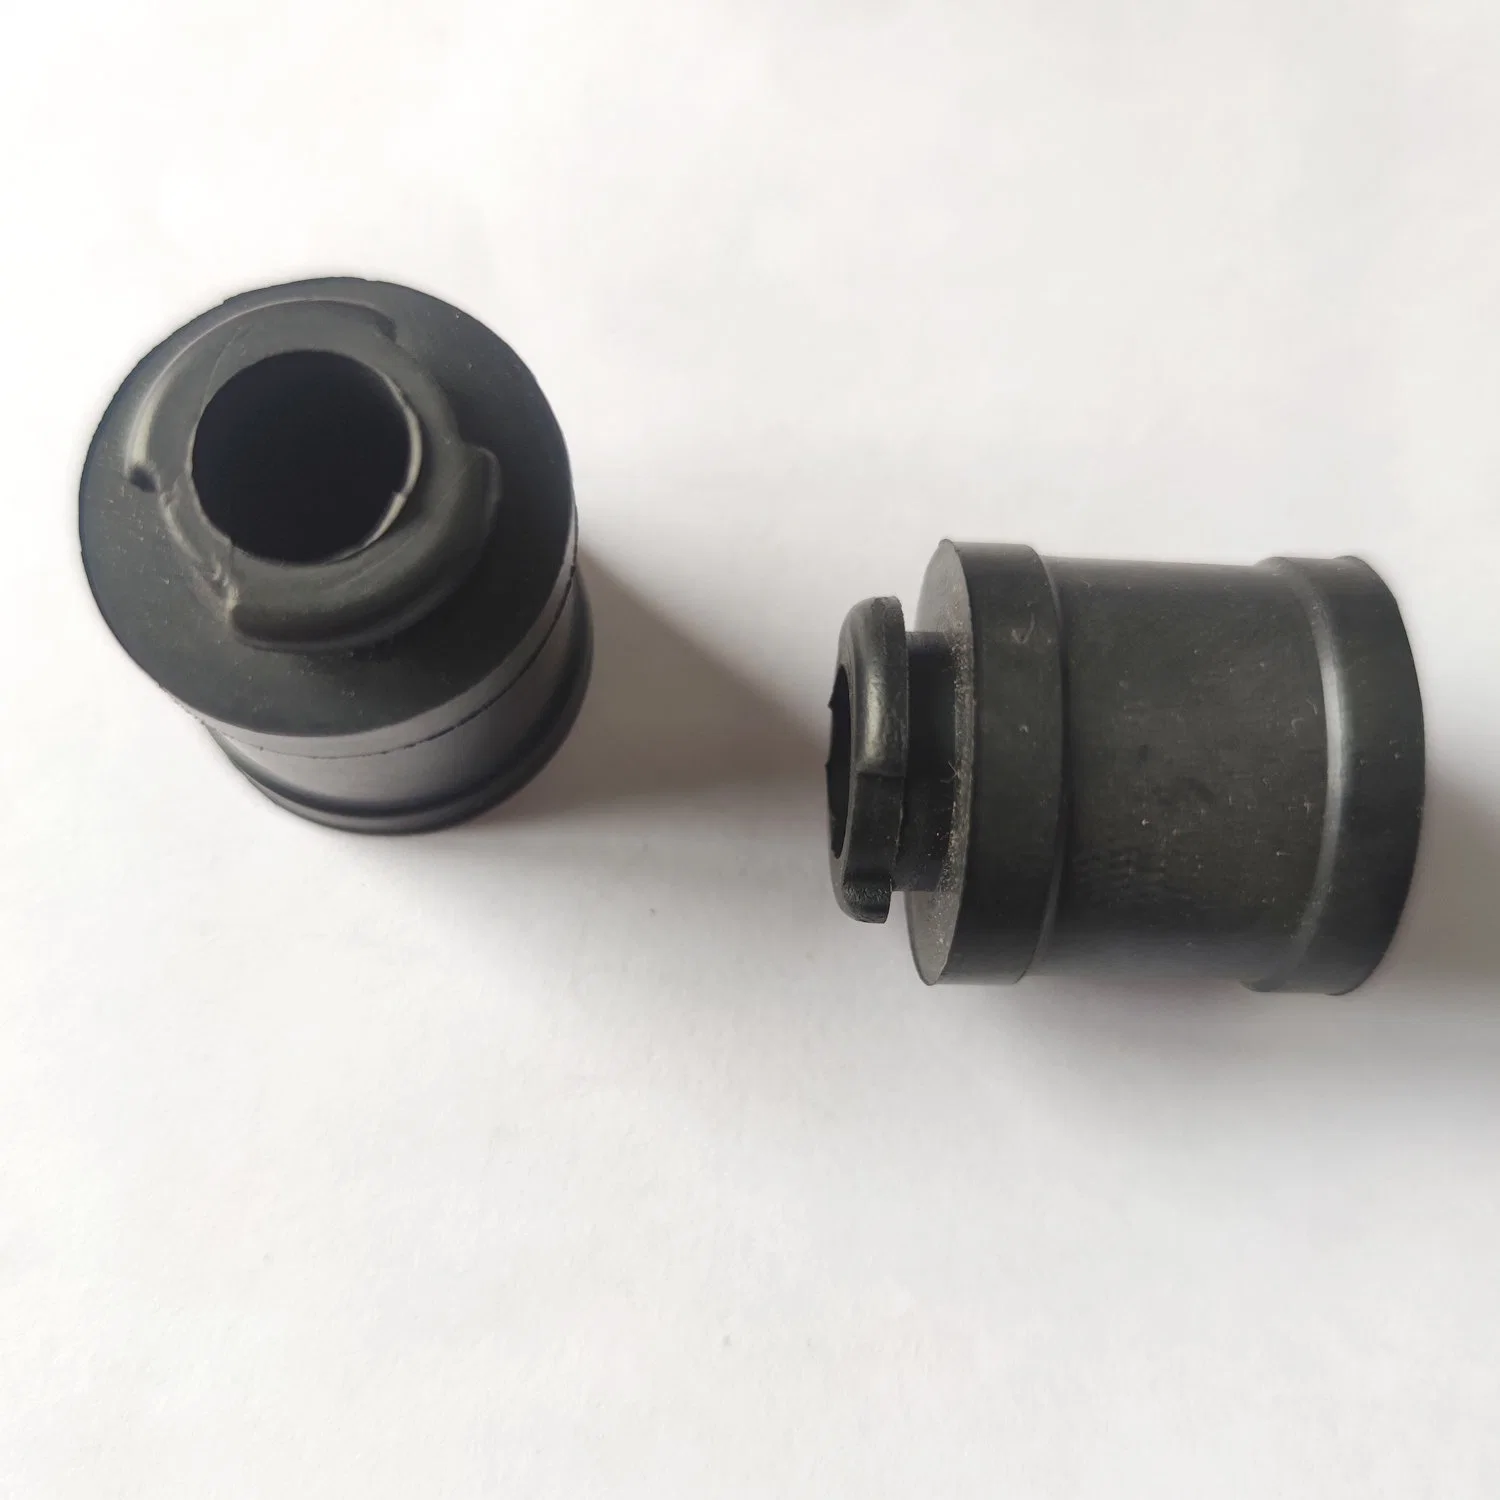 Rubber Oil Seal Screw Compressor Parts for Refrigerator Electrical Home Appliances